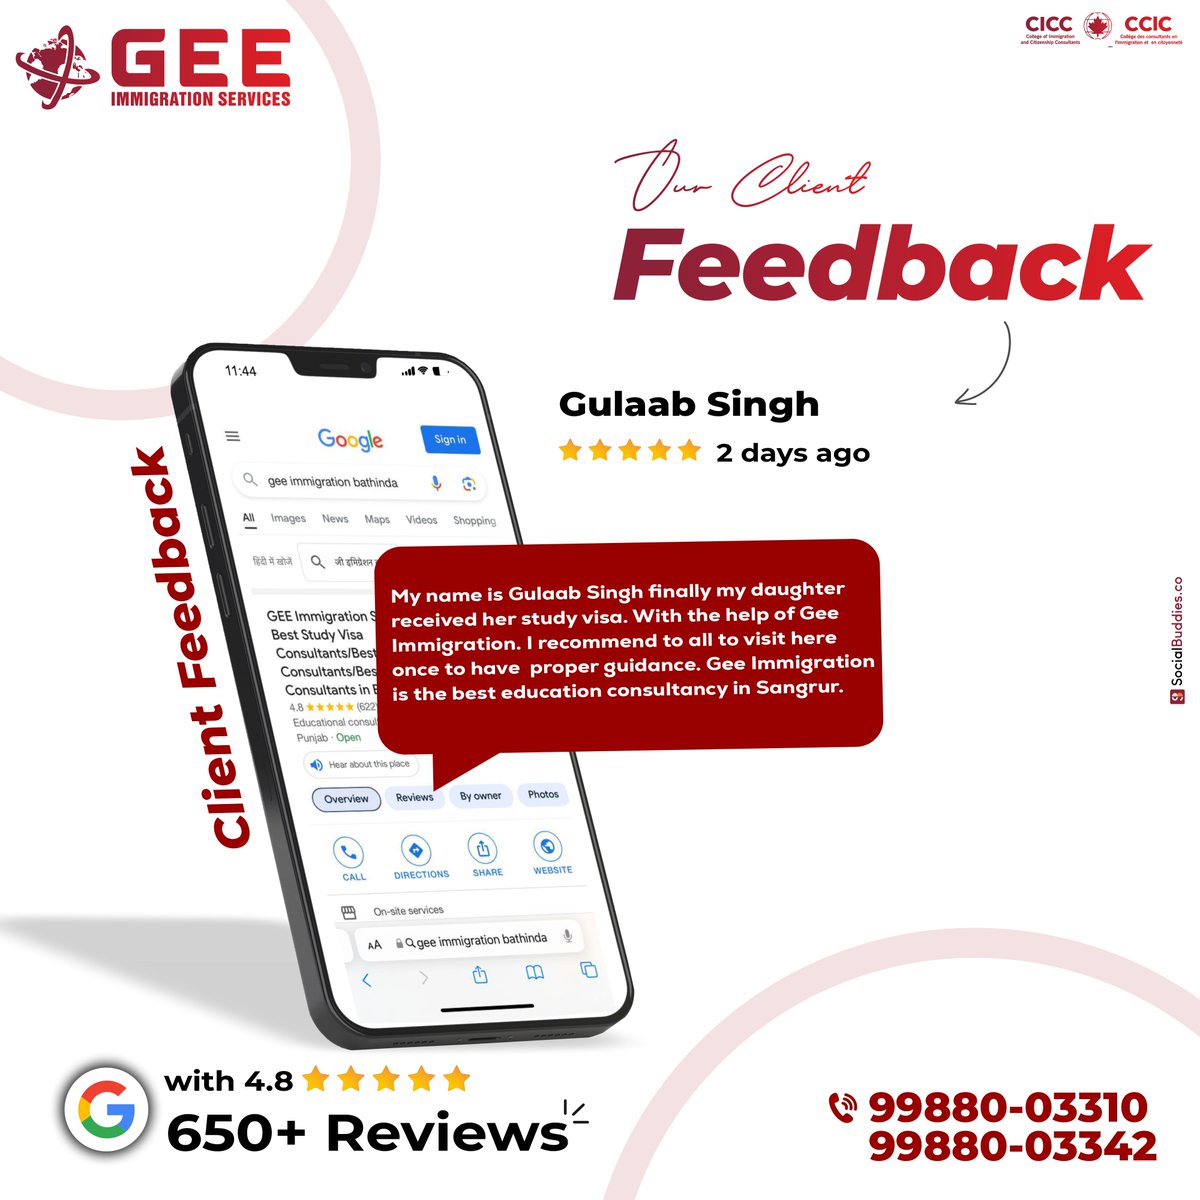 What our client say about us 📷
.
📷 For more info, dial +91 9988003342. 
.
#ReviewPost #newsuccess #Visasuccessstory #clientsreview #ClientFeedback #SatisfiedCustomer #internationaleducation #studyoverseas #immigrationexperts #geeimmigrationservices #geebathinda